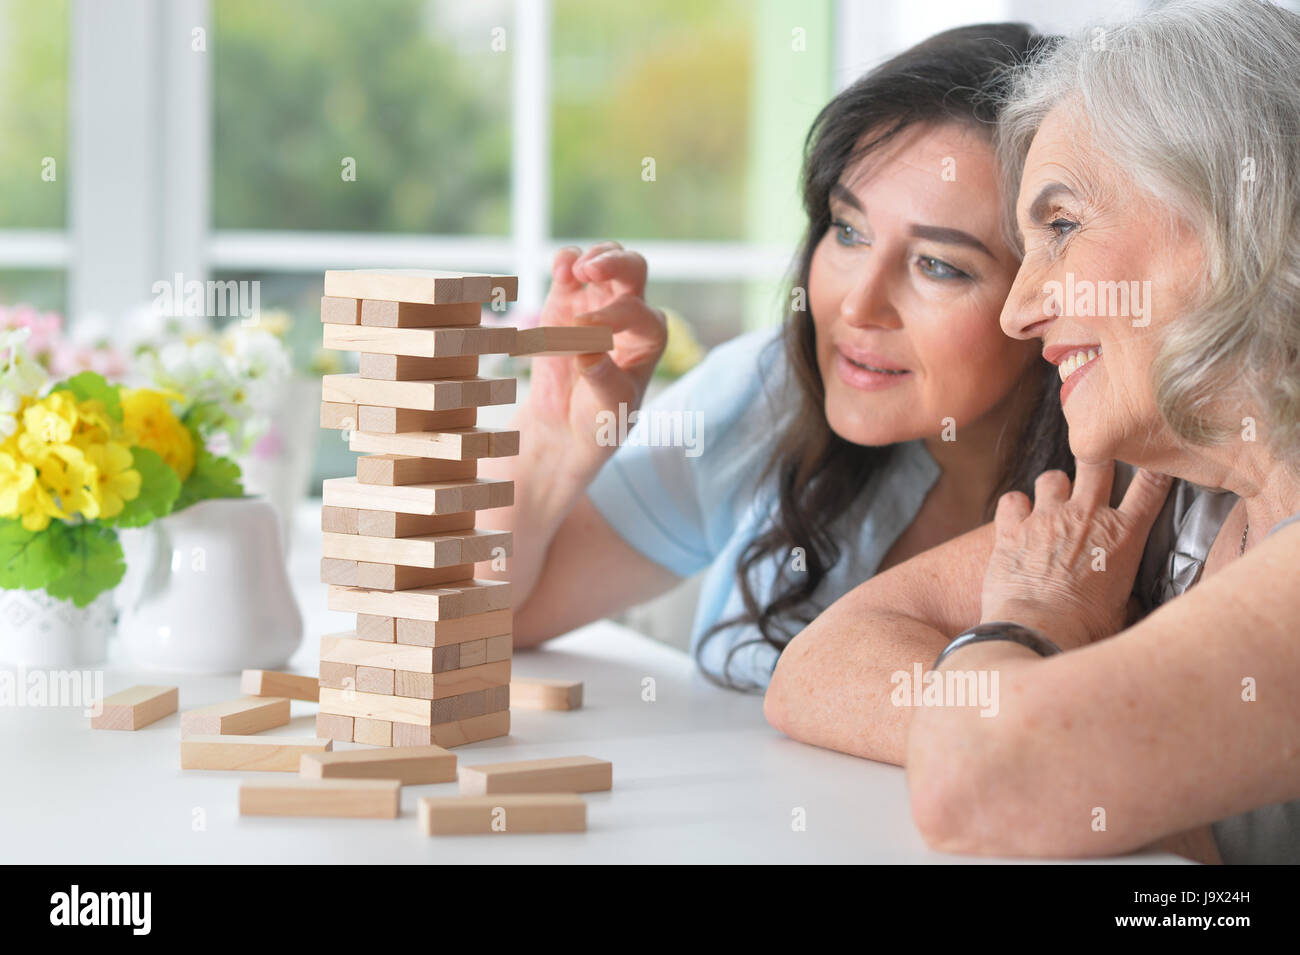 Old people play a board game Stock Photo